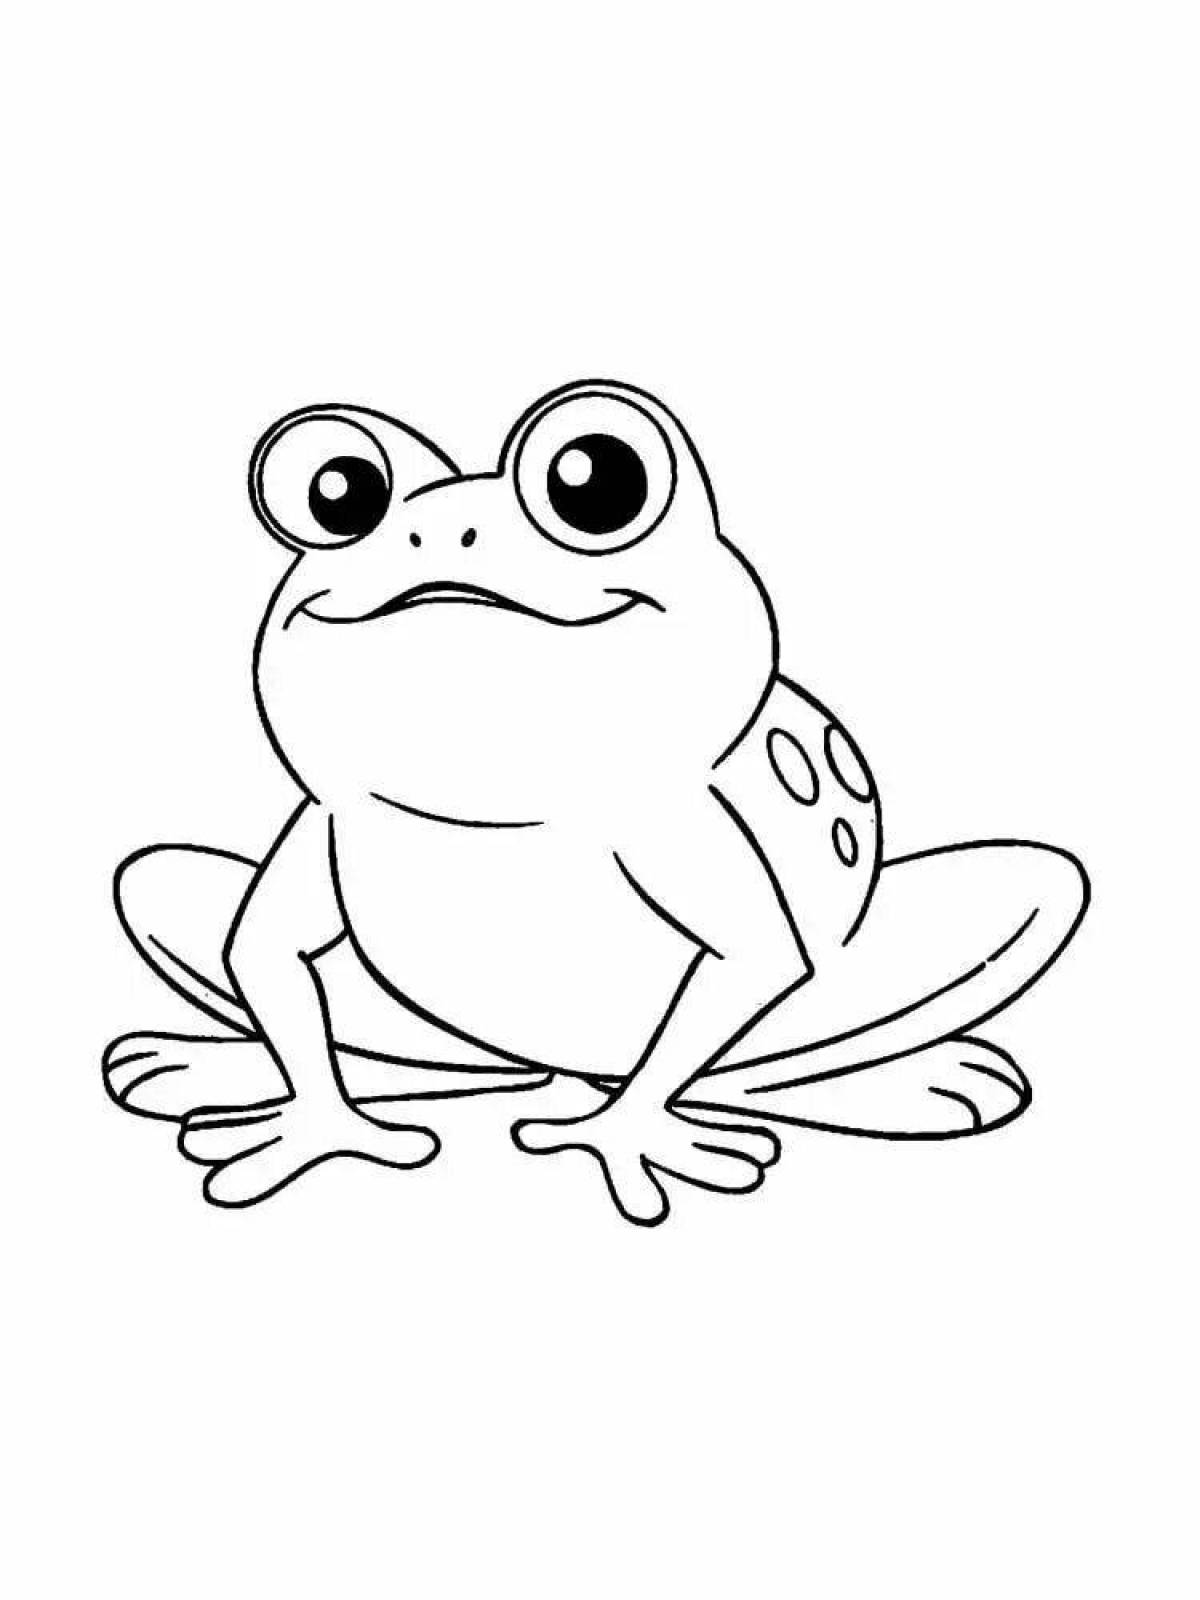 Coloring page glowing cute frog